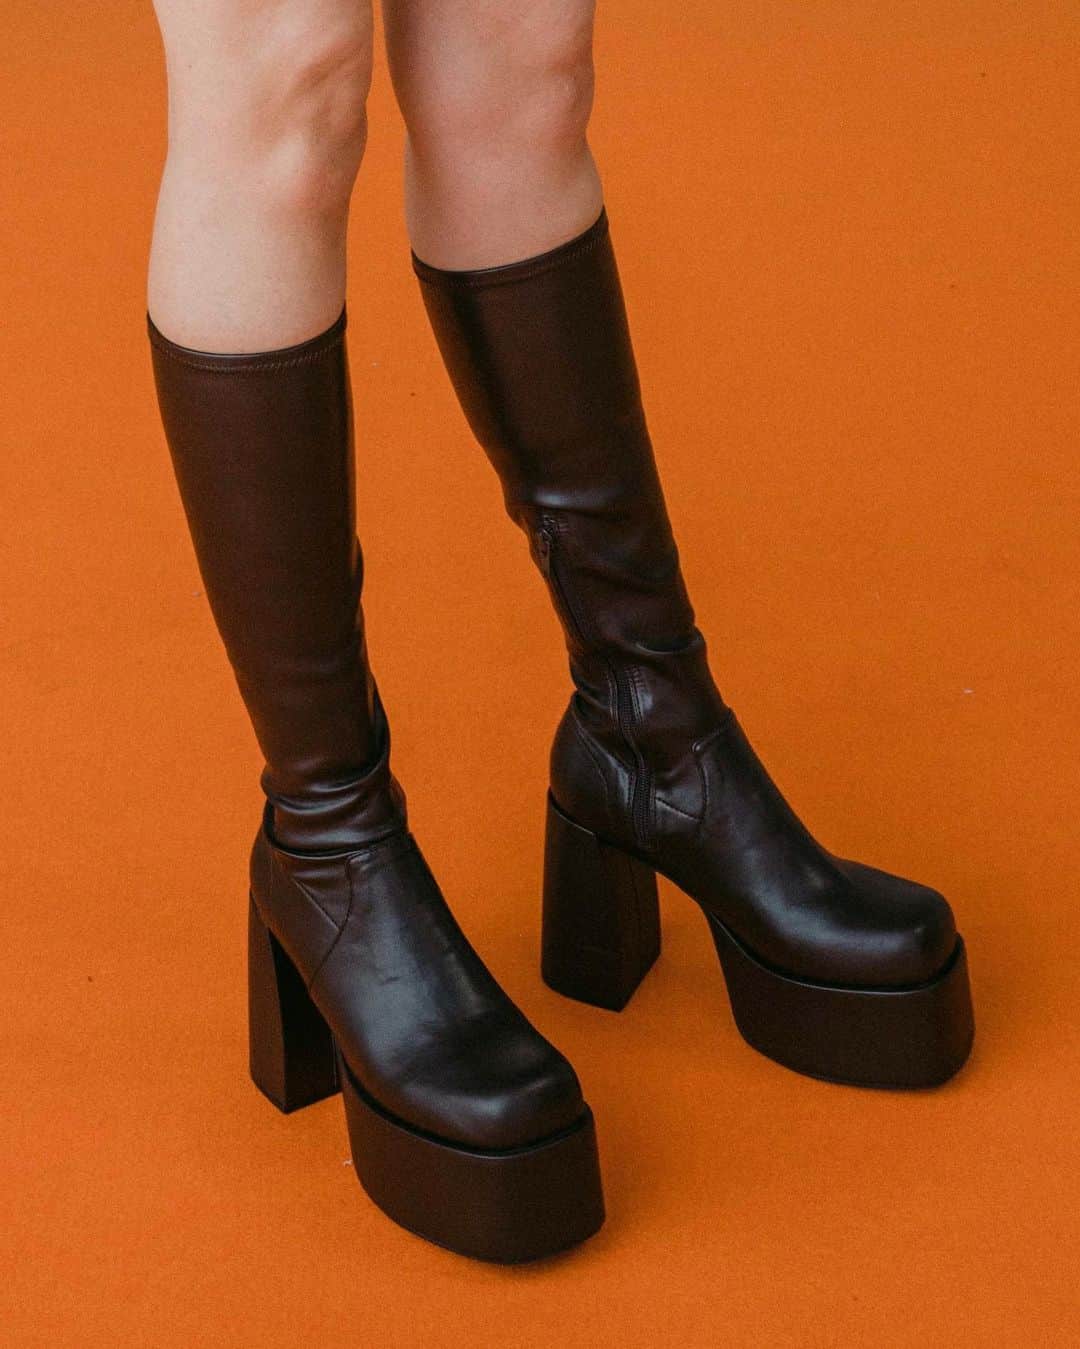 EMODAさんのインスタグラム写真 - (EMODAInstagram)「ㅤㅤㅤㅤㅤㅤㅤㅤㅤㅤㅤㅤ '23 autumn&winter Recommend outer ㅤㅤㅤ  ・BULKY PLUMP FIT BOOTS ￥ 16,280 tax'in ＿＿＿＿＿＿＿＿＿＿＿＿＿＿＿＿＿＿＿＿＿＿＿＿ ≪RUNWAYchannel祭り!!-第2弾-≫ 5日間限定開催！ 9/22(fri)12:00-9/26(tue)23:59  ＼お得なイベント毎日開催!!／  ■POINT×20フェア&送料無料 >9/22(fri)12:00-9/26(tue)23:59 最新アイテムポイント20倍還元。次回も更にお得に!!  ■10人に1人がタダ?! 期間中限定イベント！！  その他イベントもCHECK！ ＿＿＿＿＿＿＿＿＿＿＿＿＿＿＿＿＿＿＿＿＿＿＿＿ 詳細は( @emoda_official )のTOPのURL,storiesチェック✔️ㅤㅤ ㅤㅤㅤ ㅤㅤㅤㅤㅤ ㅤㅤㅤㅤㅤ ㅤㅤㅤㅤ #EMODA #EMODA_SHOES #boots #ブーツ #ロングブーツ #RUNWAYchannel #2023AW #autumn @emoda_snap」9月23日 21時13分 - emoda_official